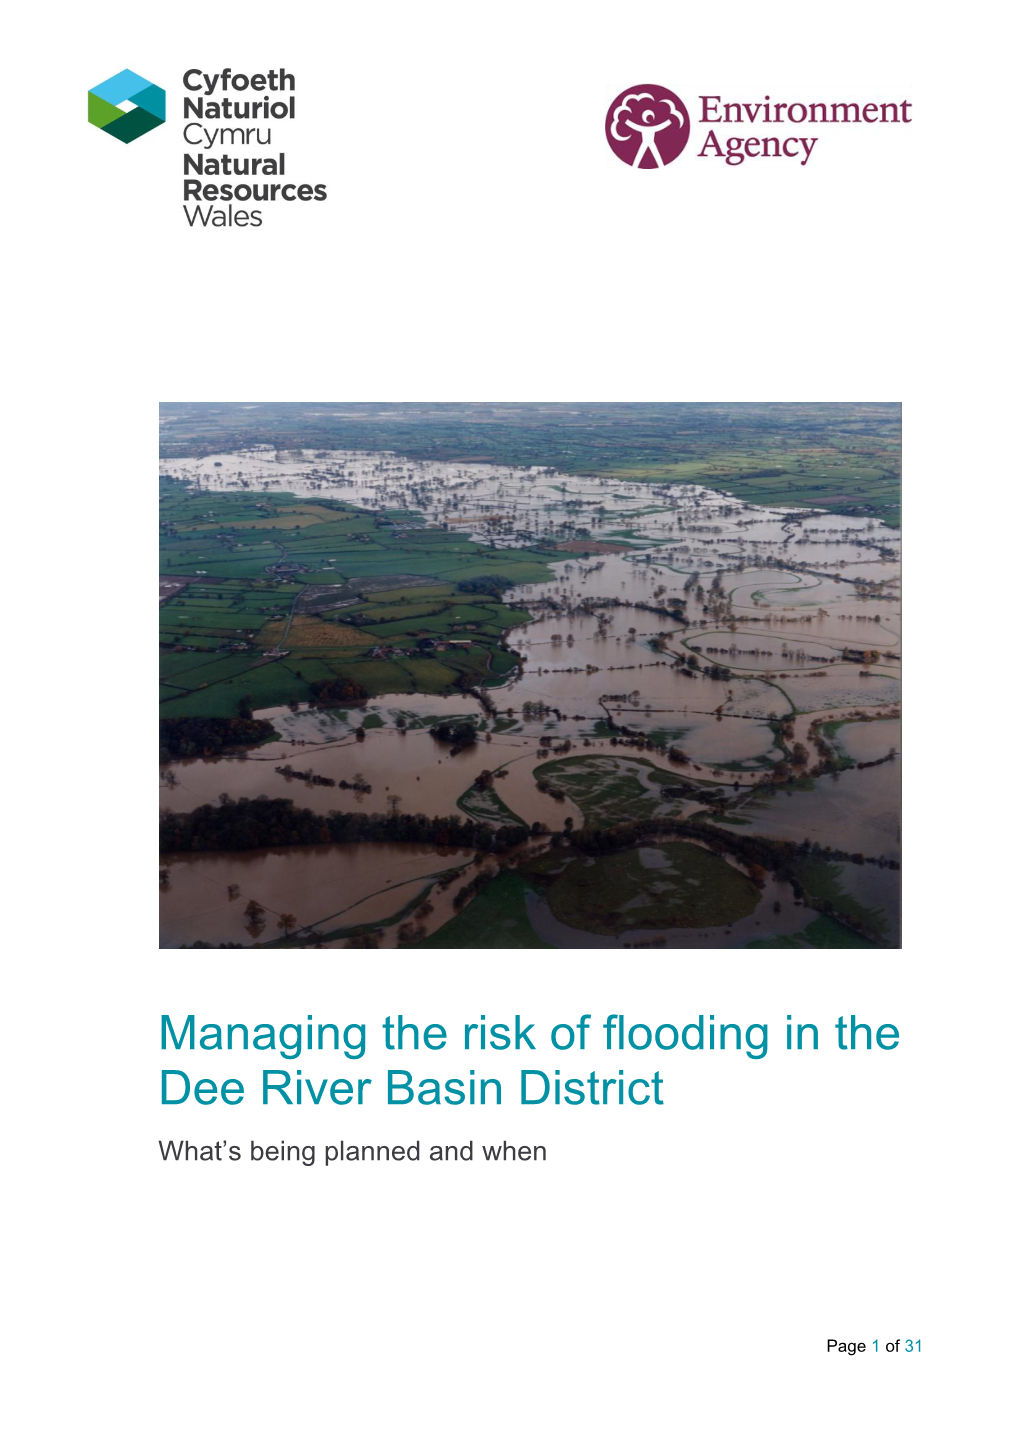 Managing the Risk of Flooding in the Dee River Basin District What’S Being Planned and When